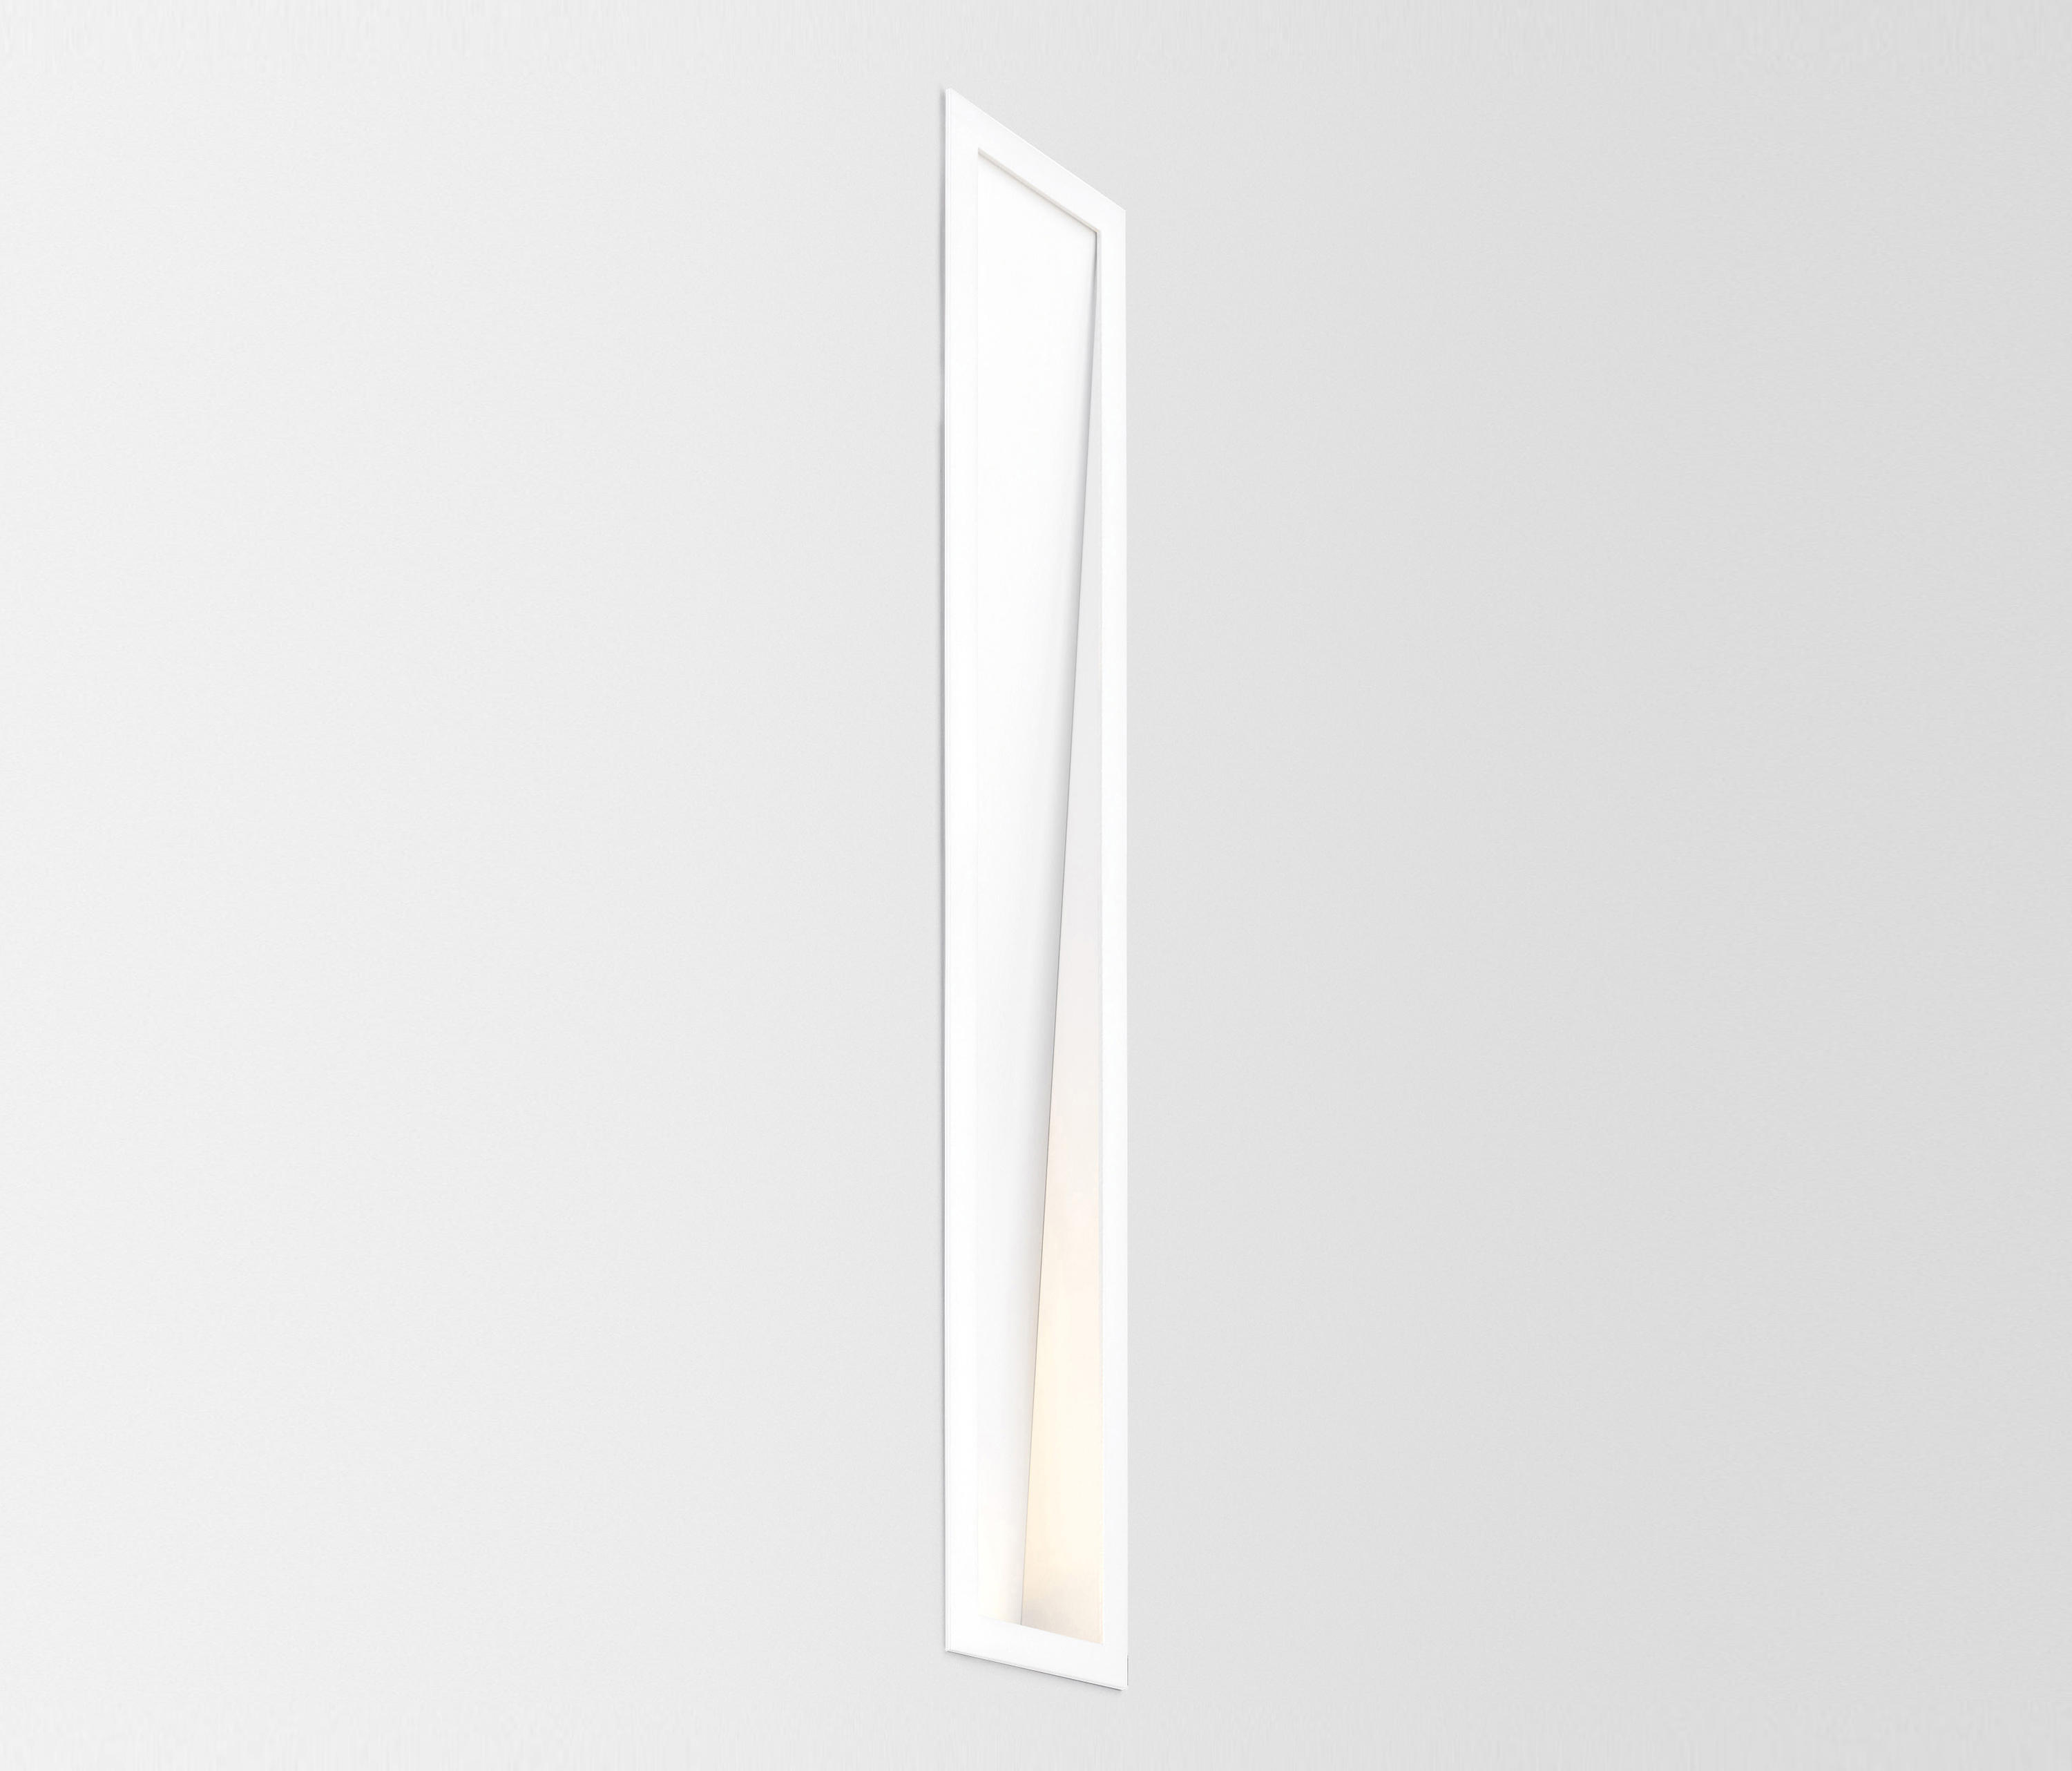 THEMIS 5.0 - Recessed wall lights from Wever & Ducré | Architonic